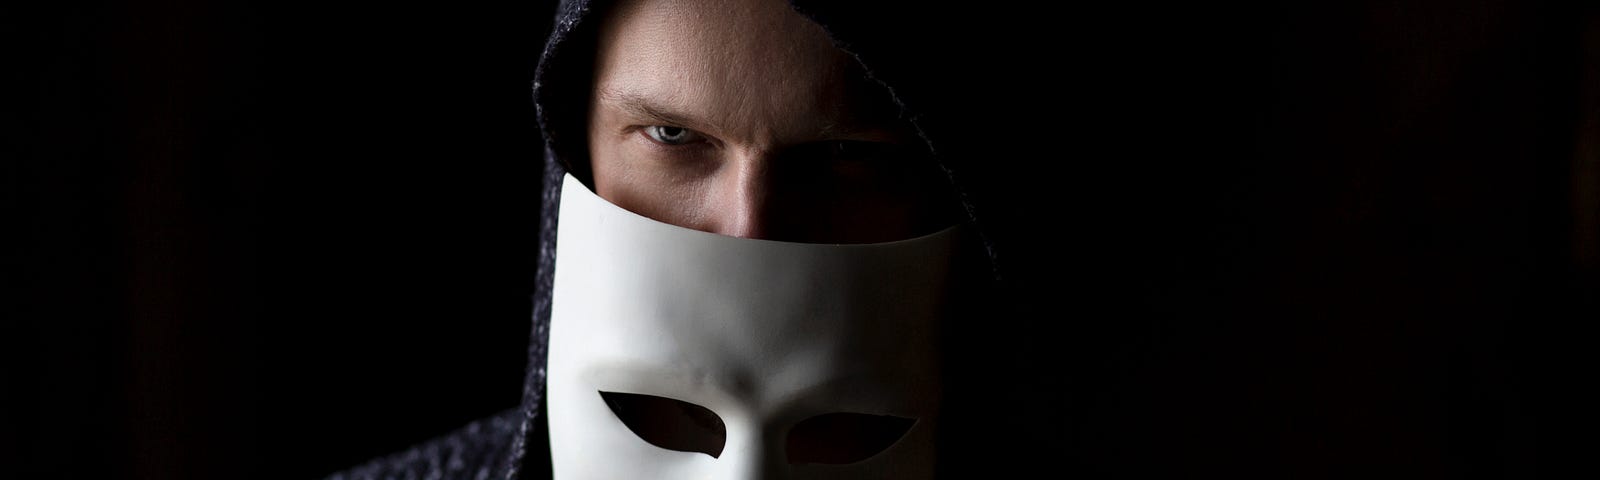 a man in the dark holds up a white mask to cover half his face